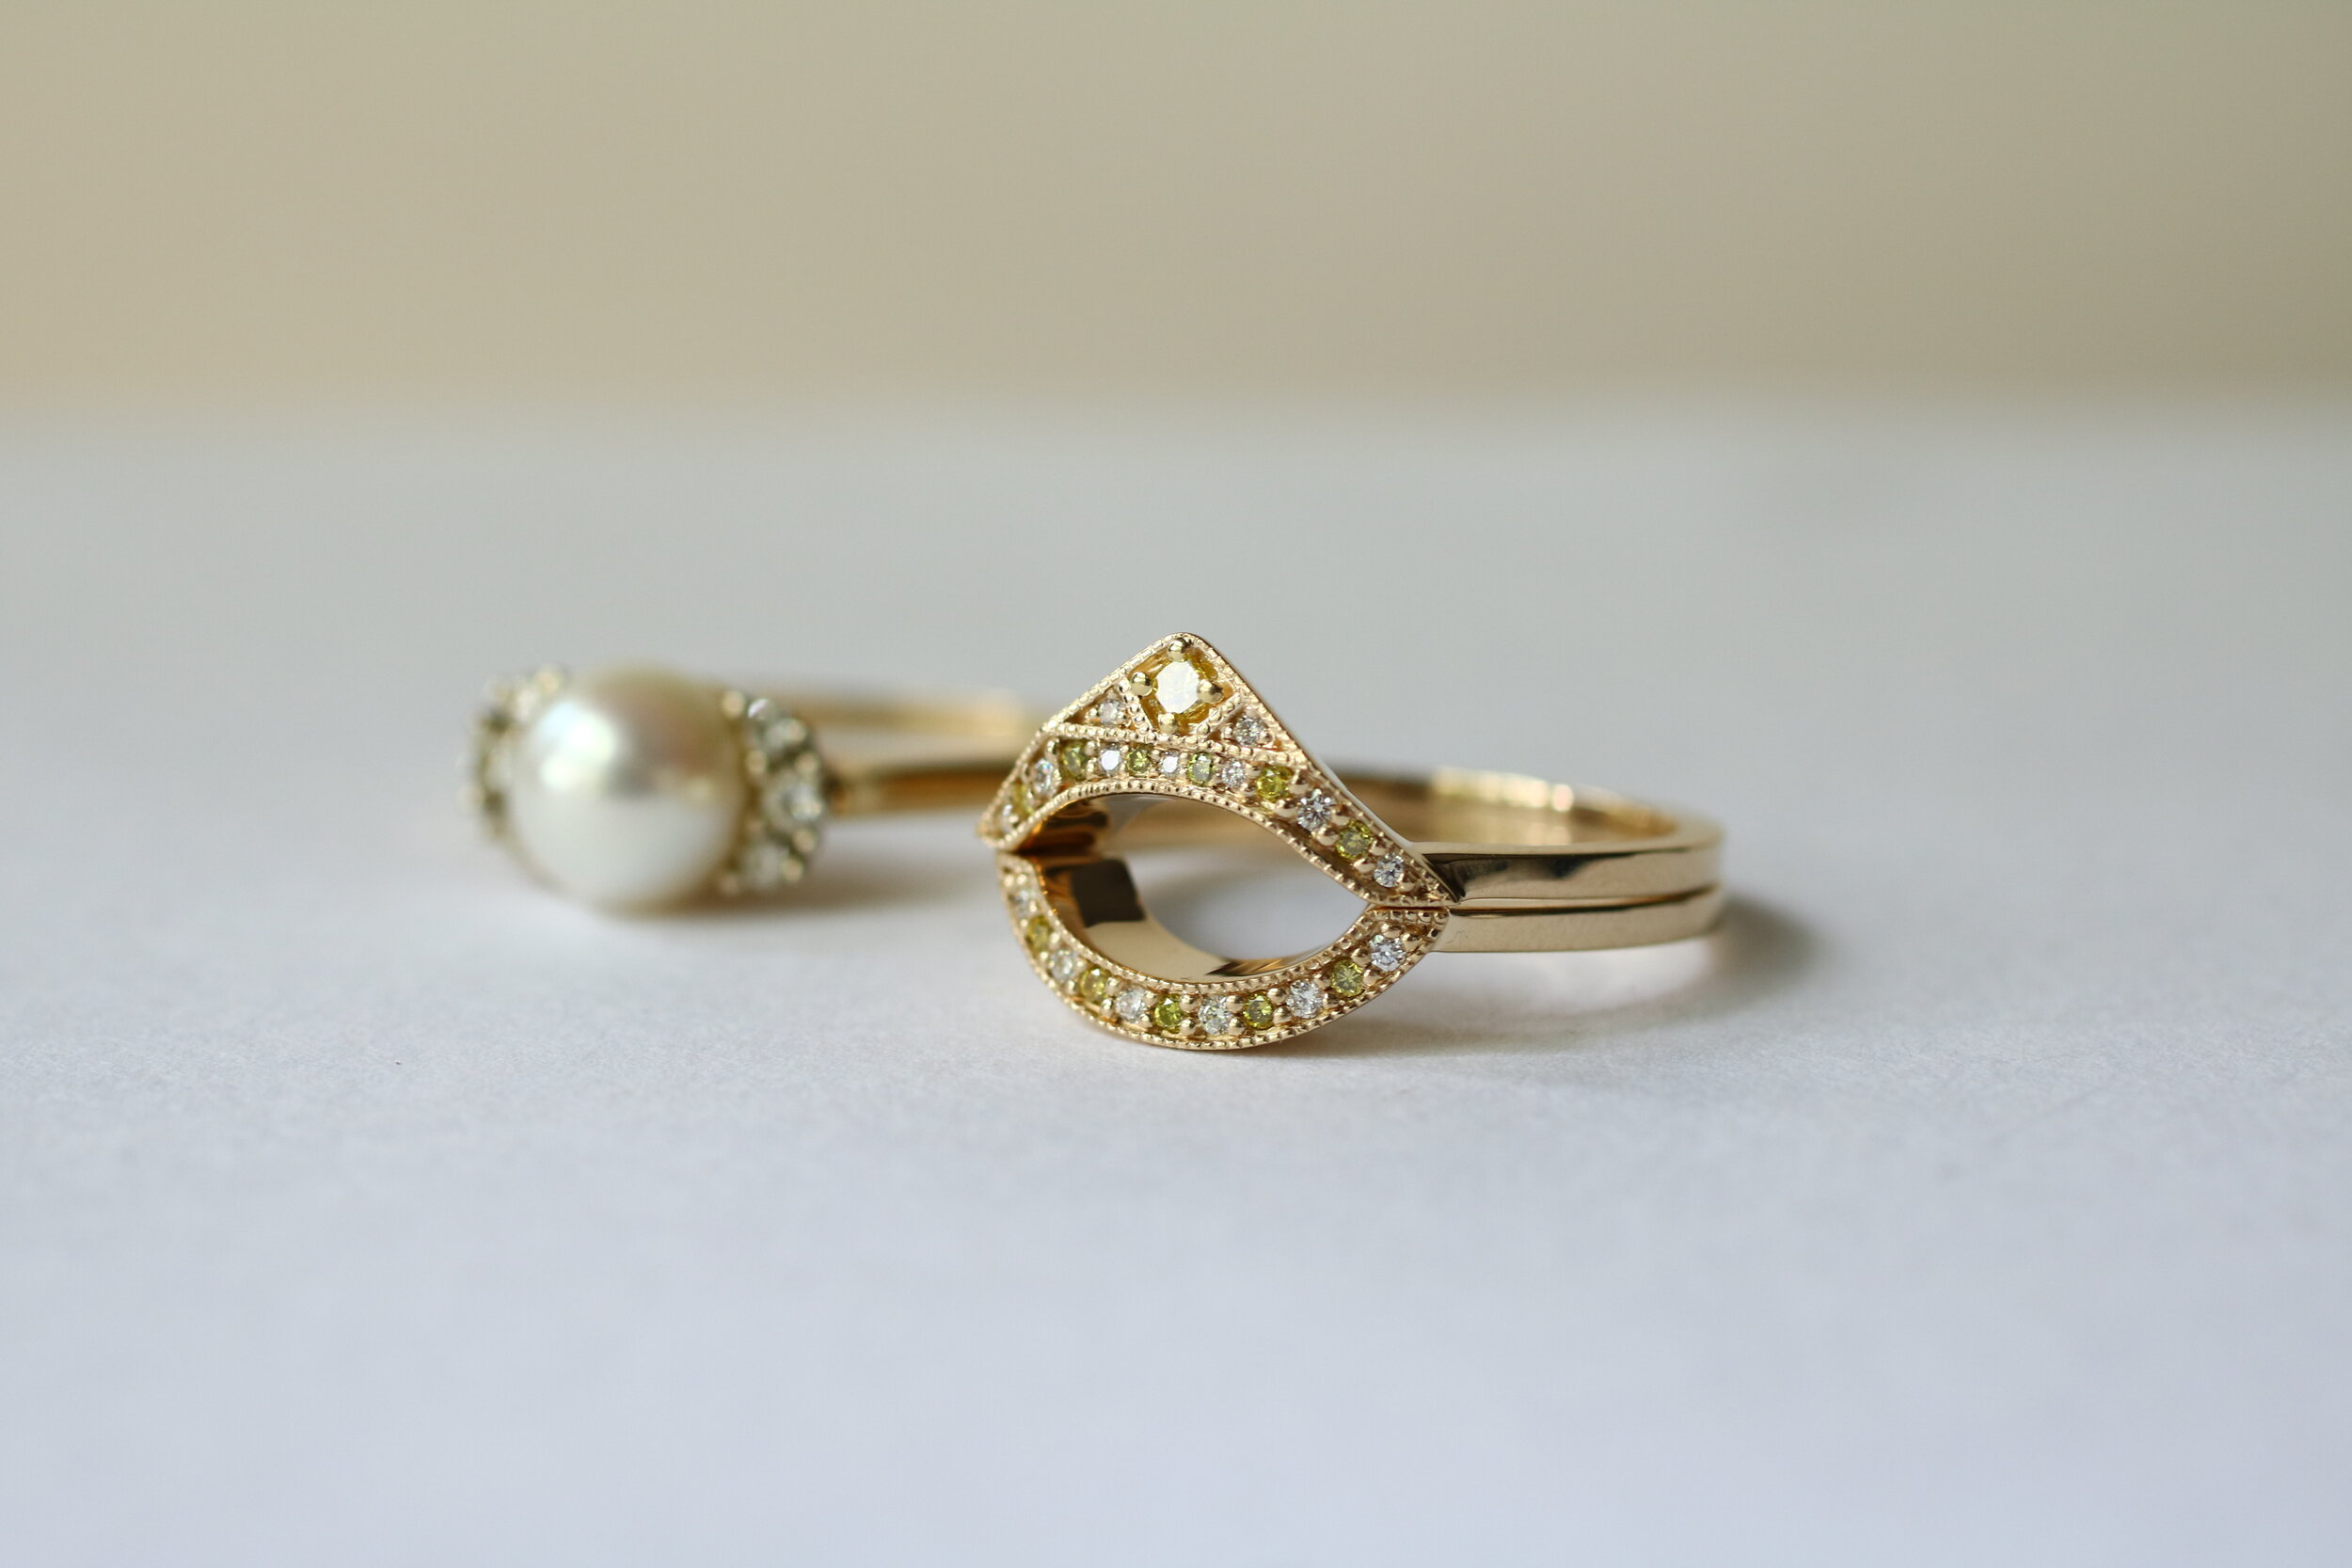 Hilary Pearl Companion Bands - 14ky gold + white + yellow diamonds